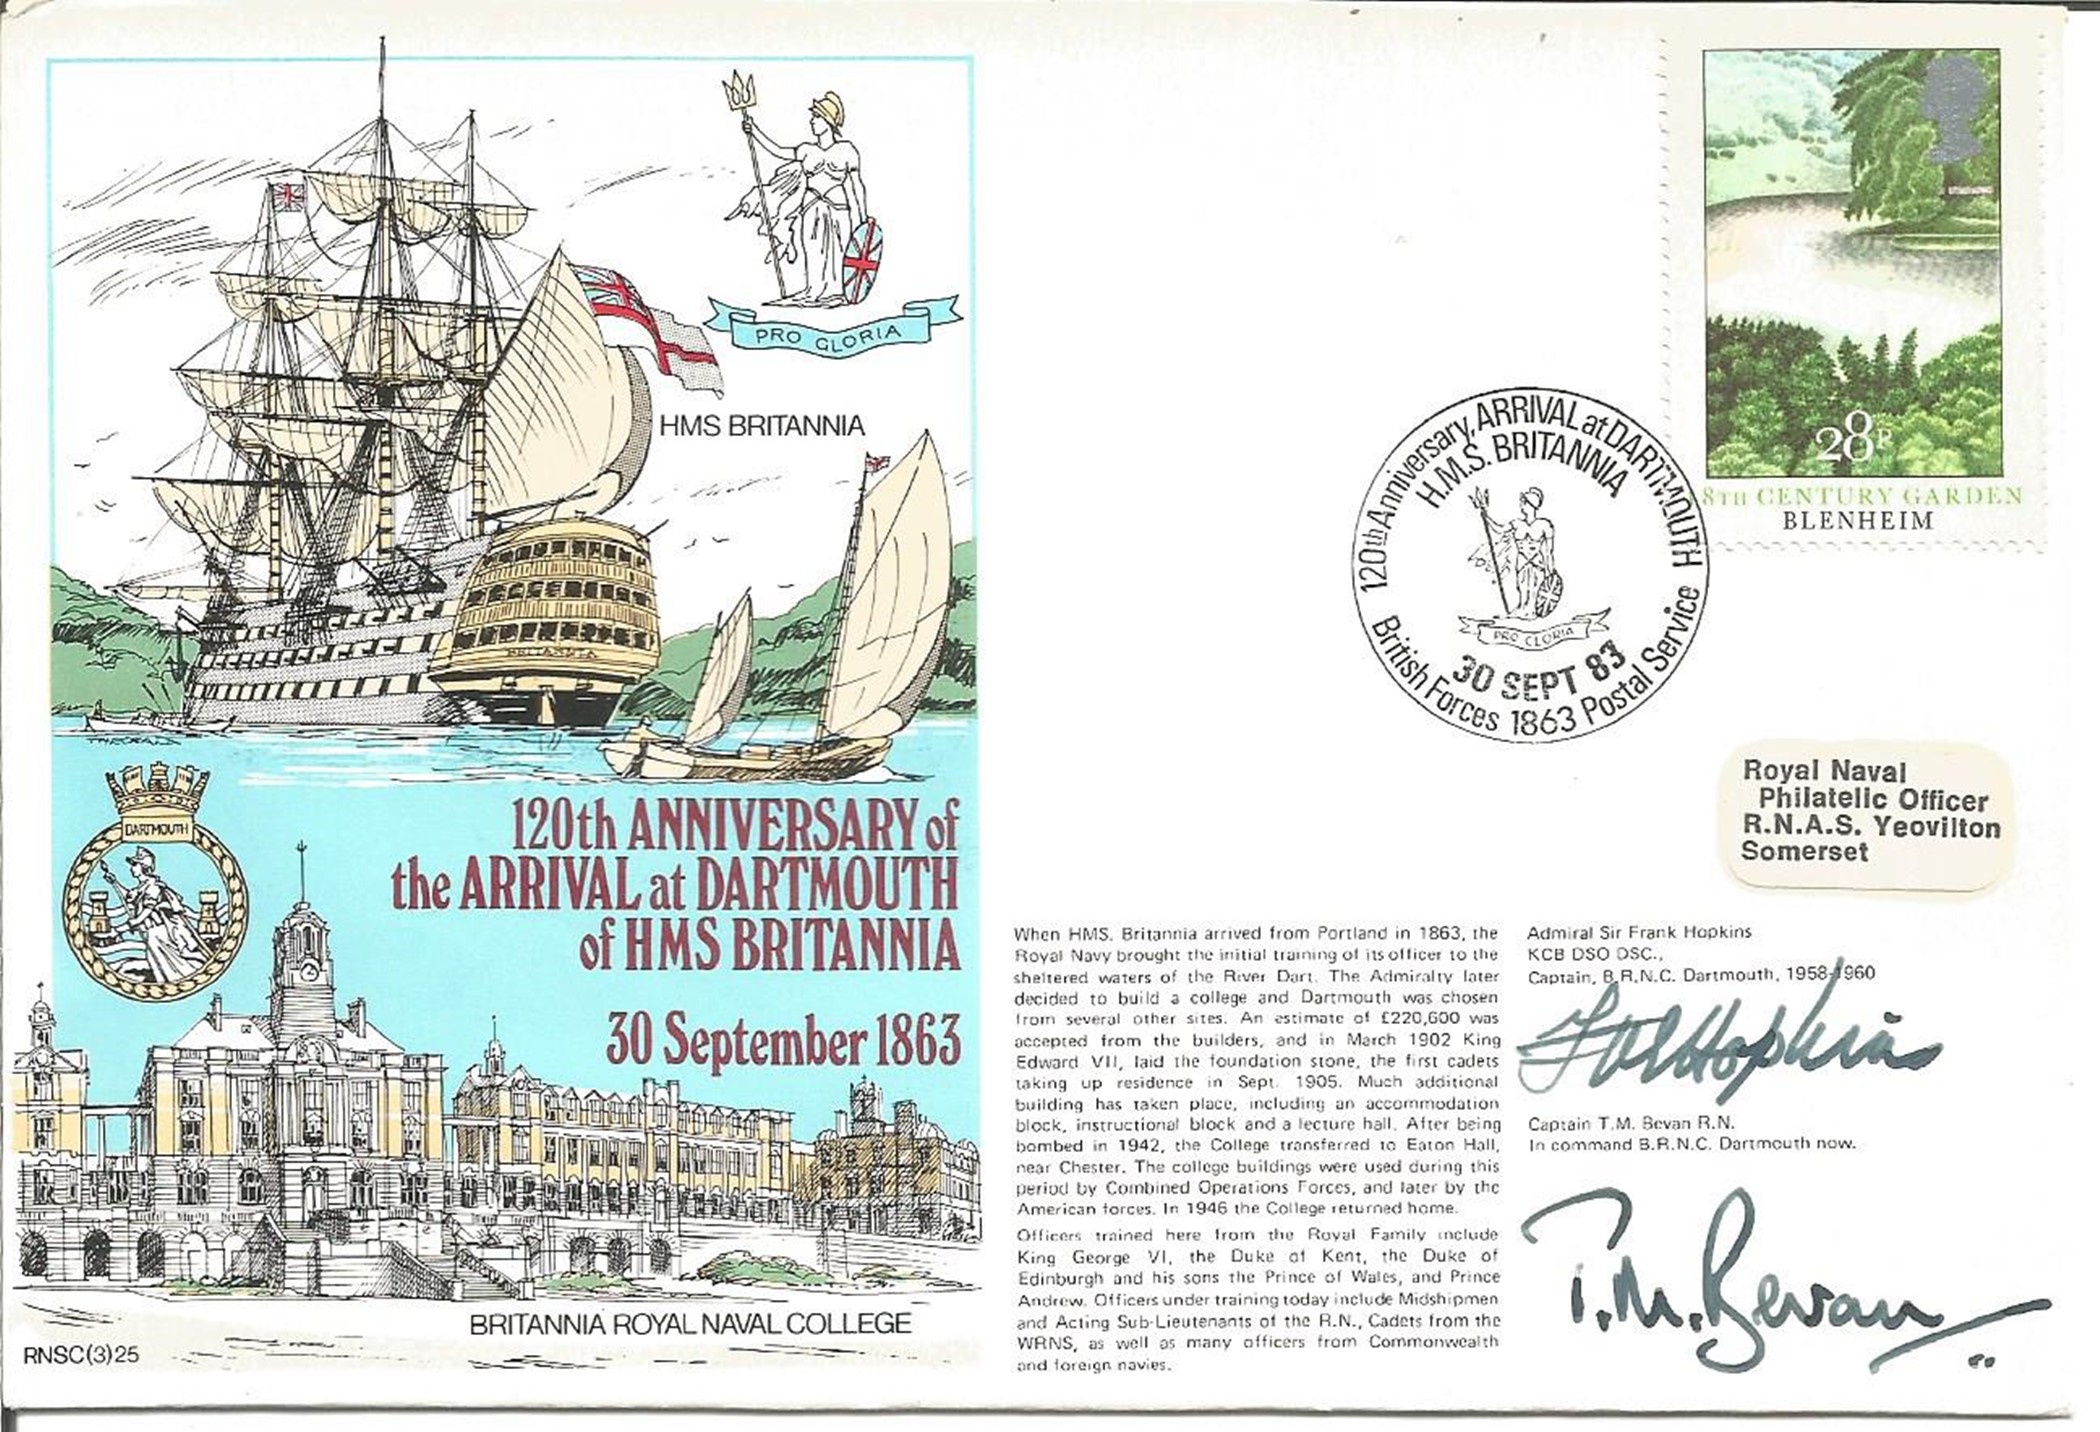 Admiral Sir Frank Hopkins and Captain T M Bevan signed RNSC(3)25 cover commemorating the 120th